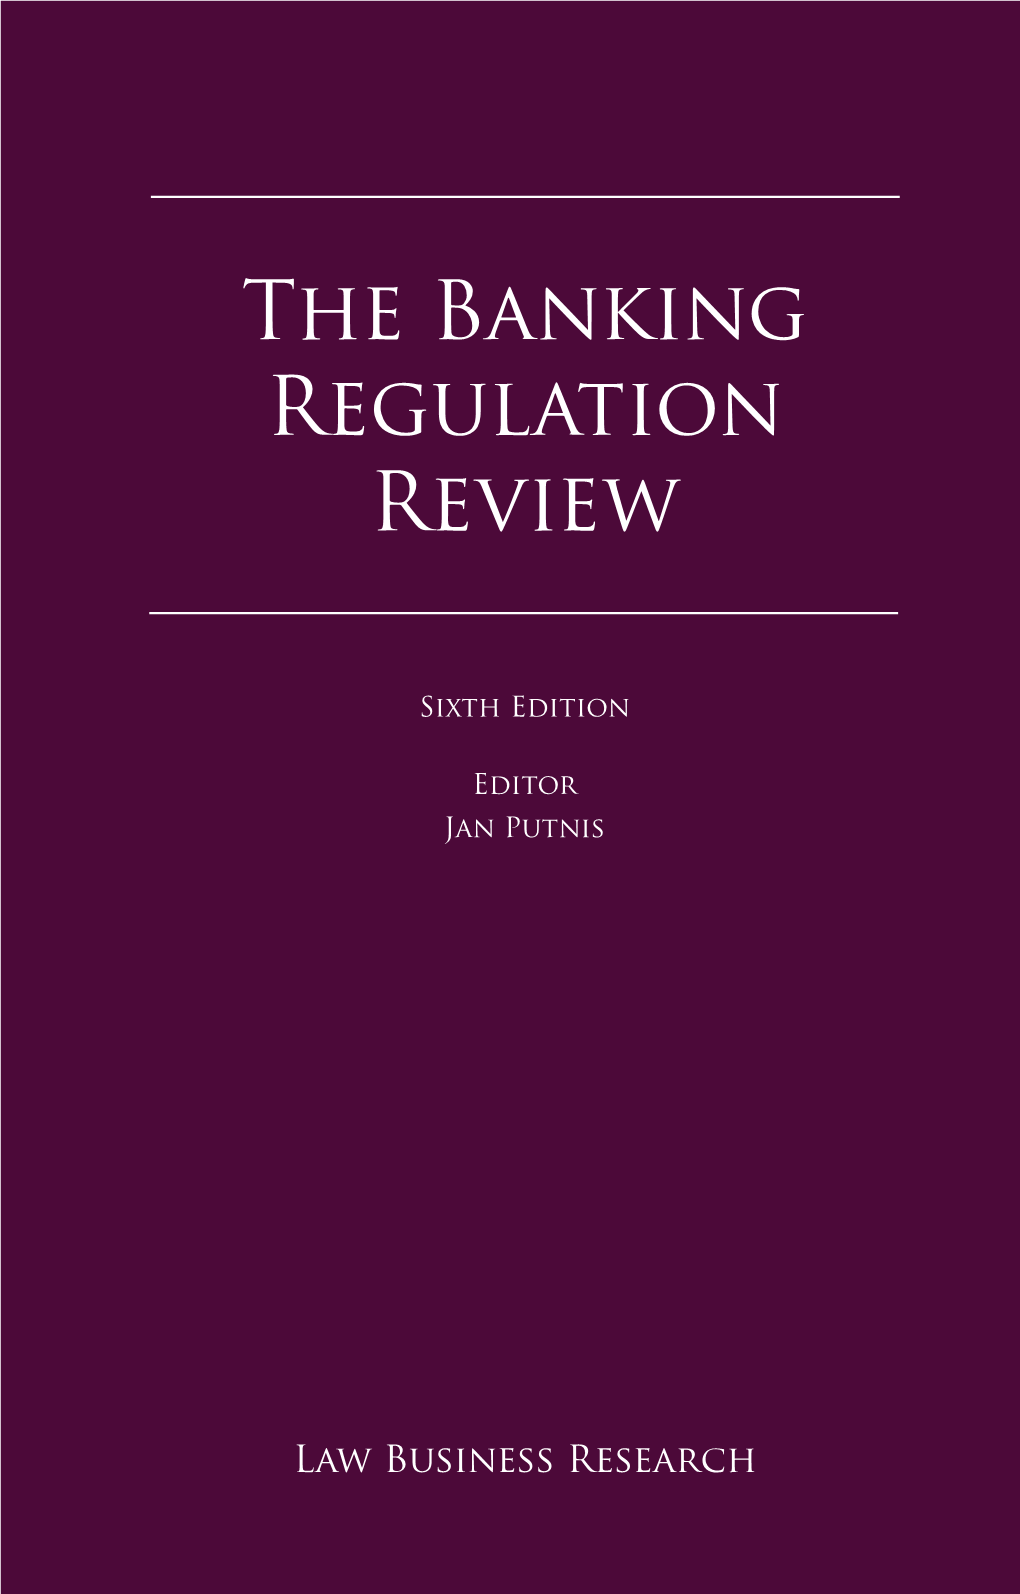 The Banking Regulation Review Reproduced with Permission from Law Business Research Ltd